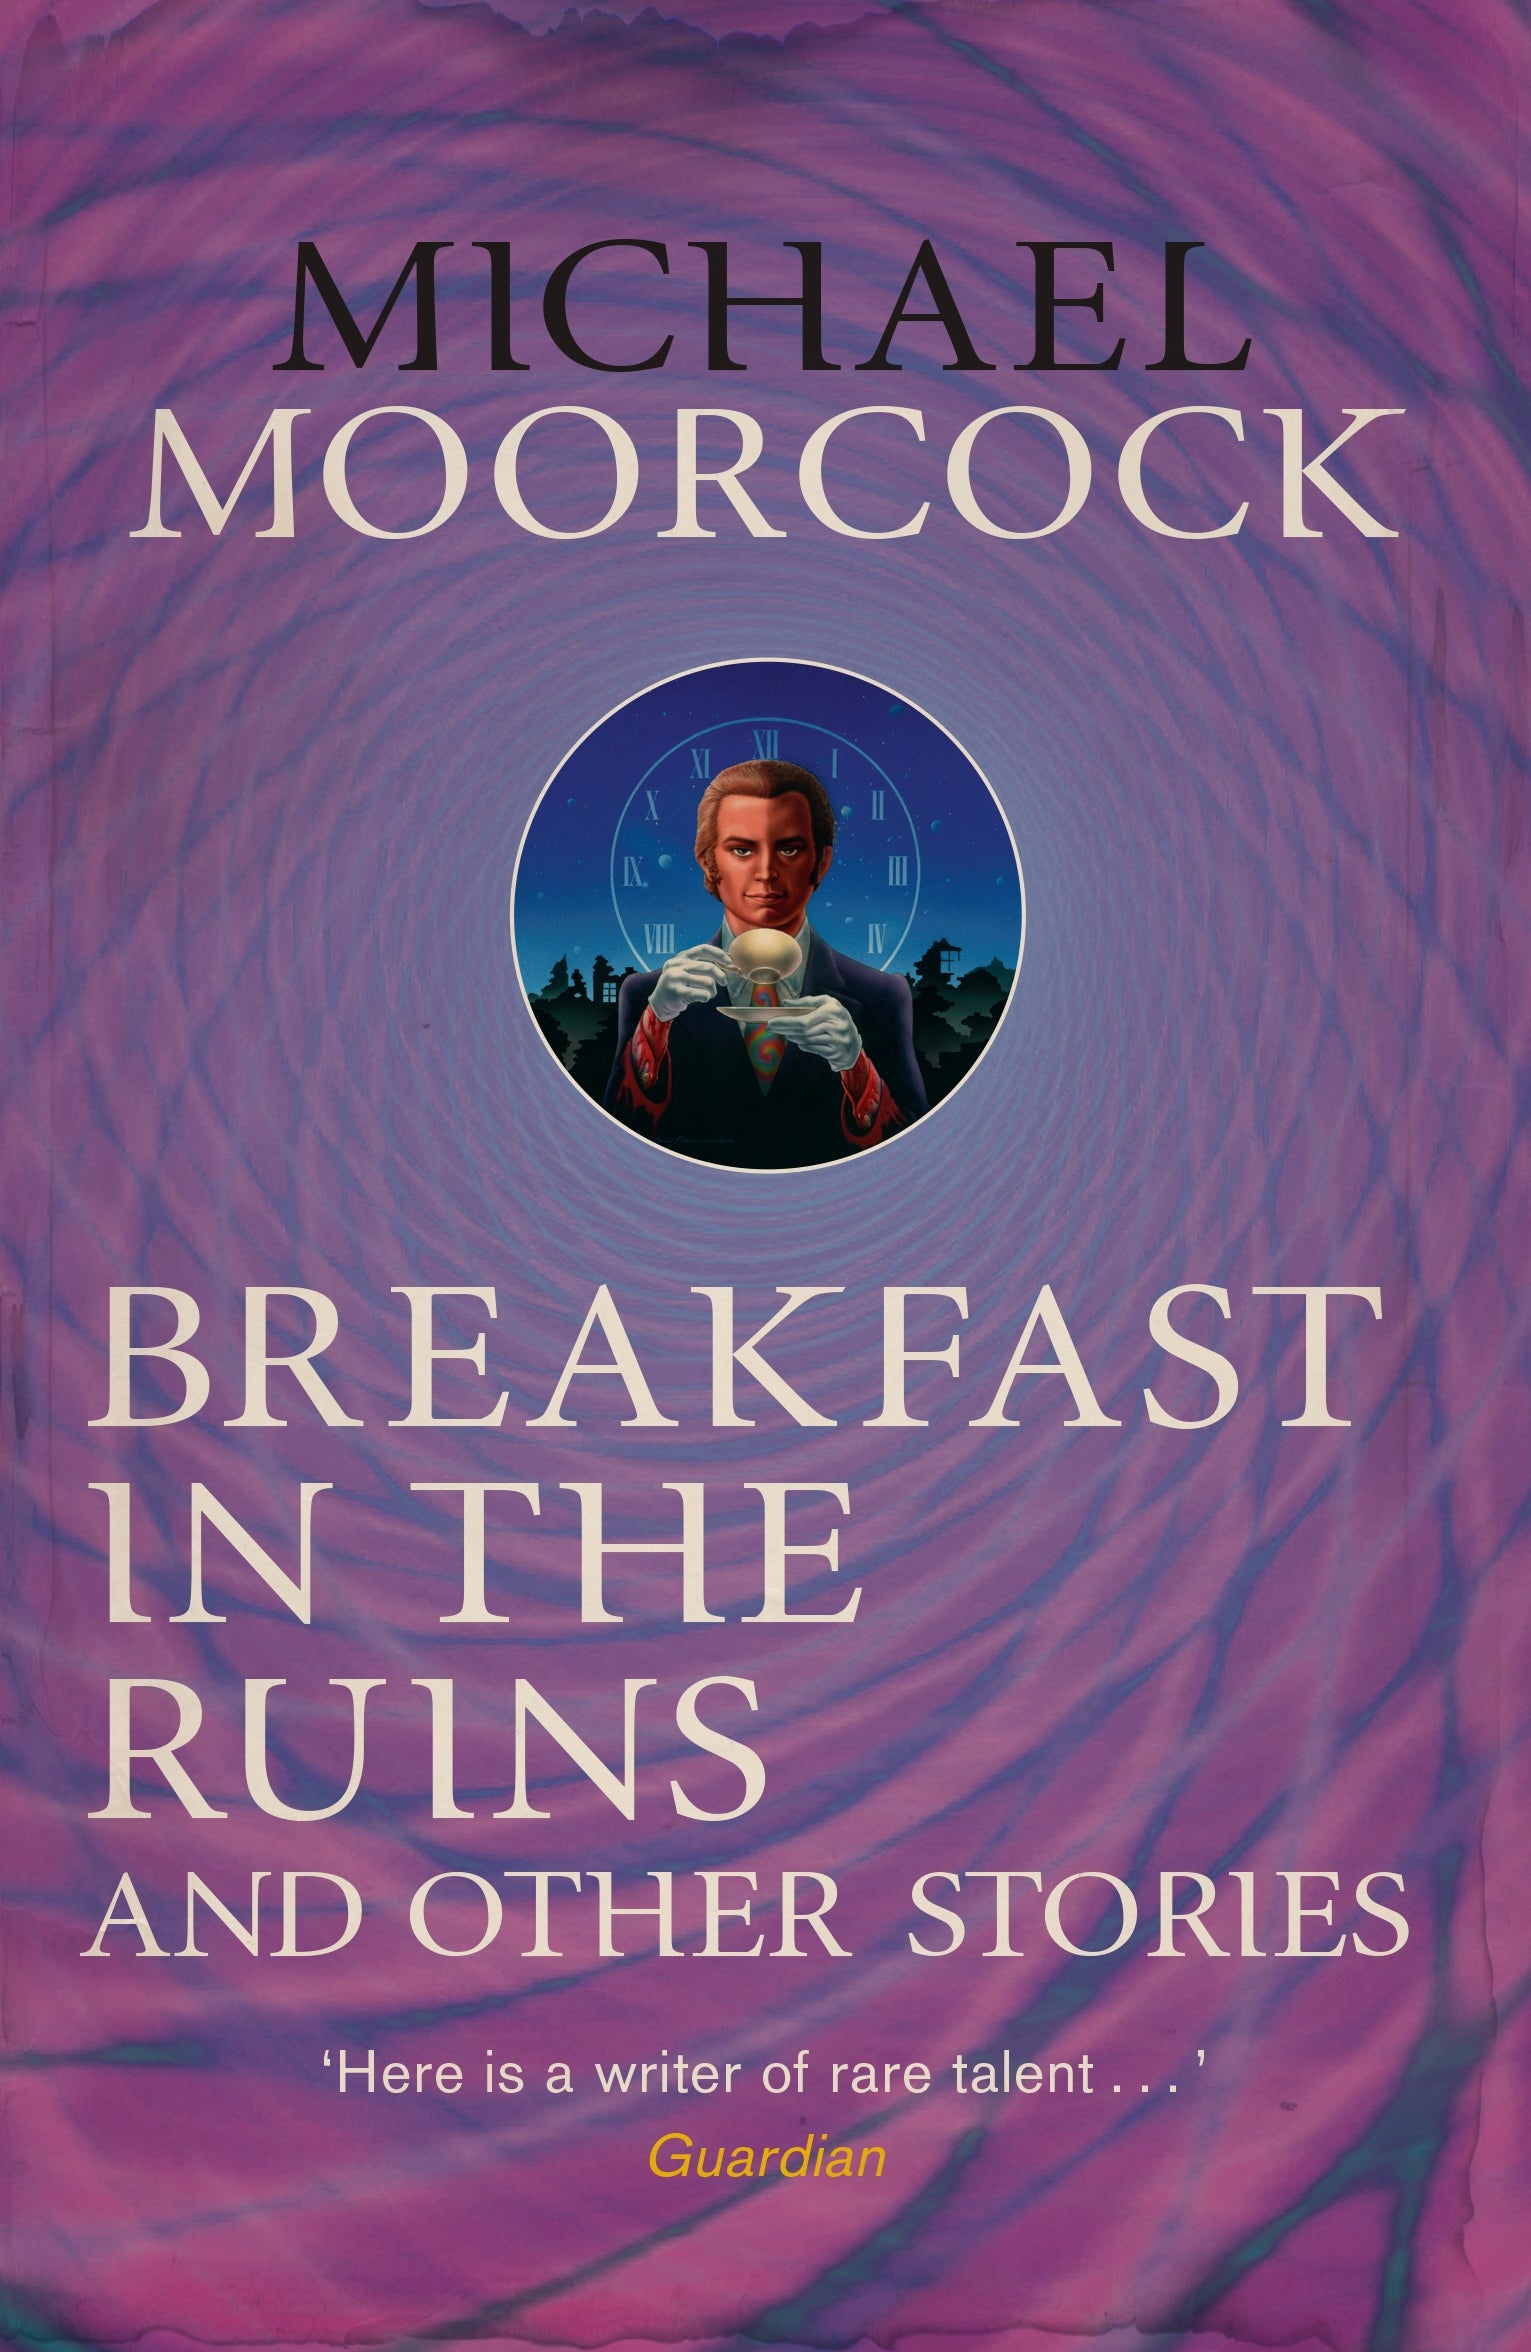 Breakfast in the Ruins and Other Stories by Michael Moorcock